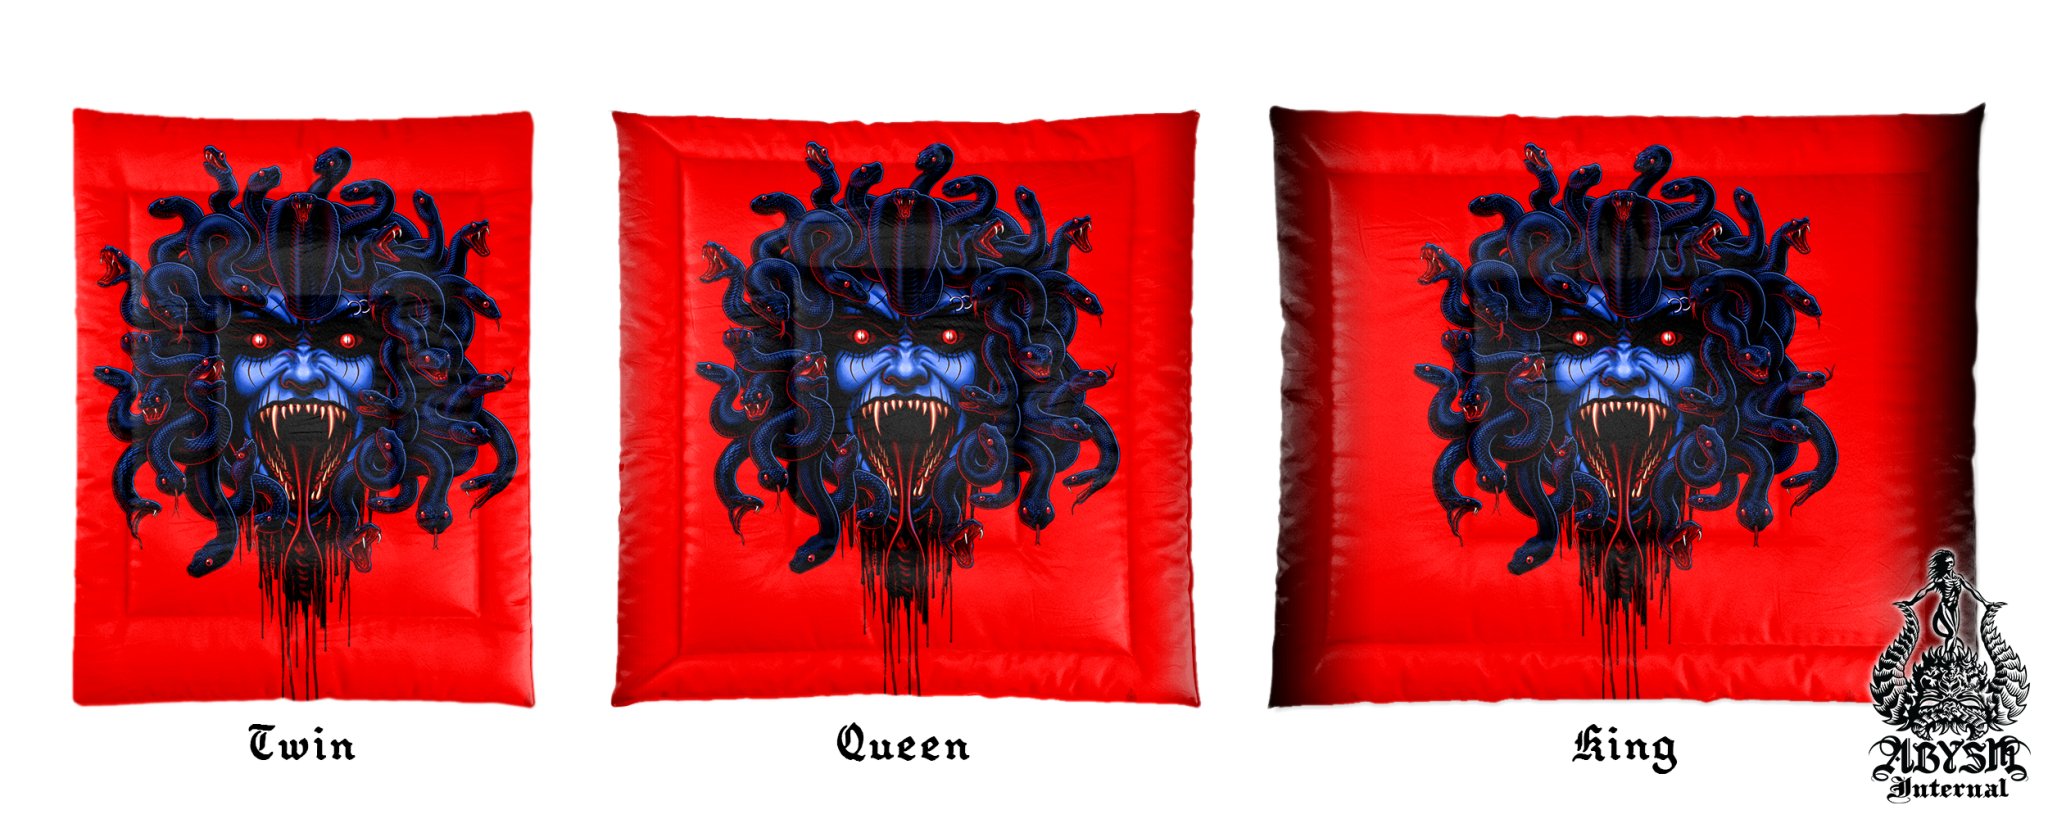 Horror Bedding Set, Red Comforter or Duvet, Gothic Neon Medusa, Goth Bed Cover, Bedroom Decor, King, Queen & Twin Size - 3 Faces - Abysm Internal